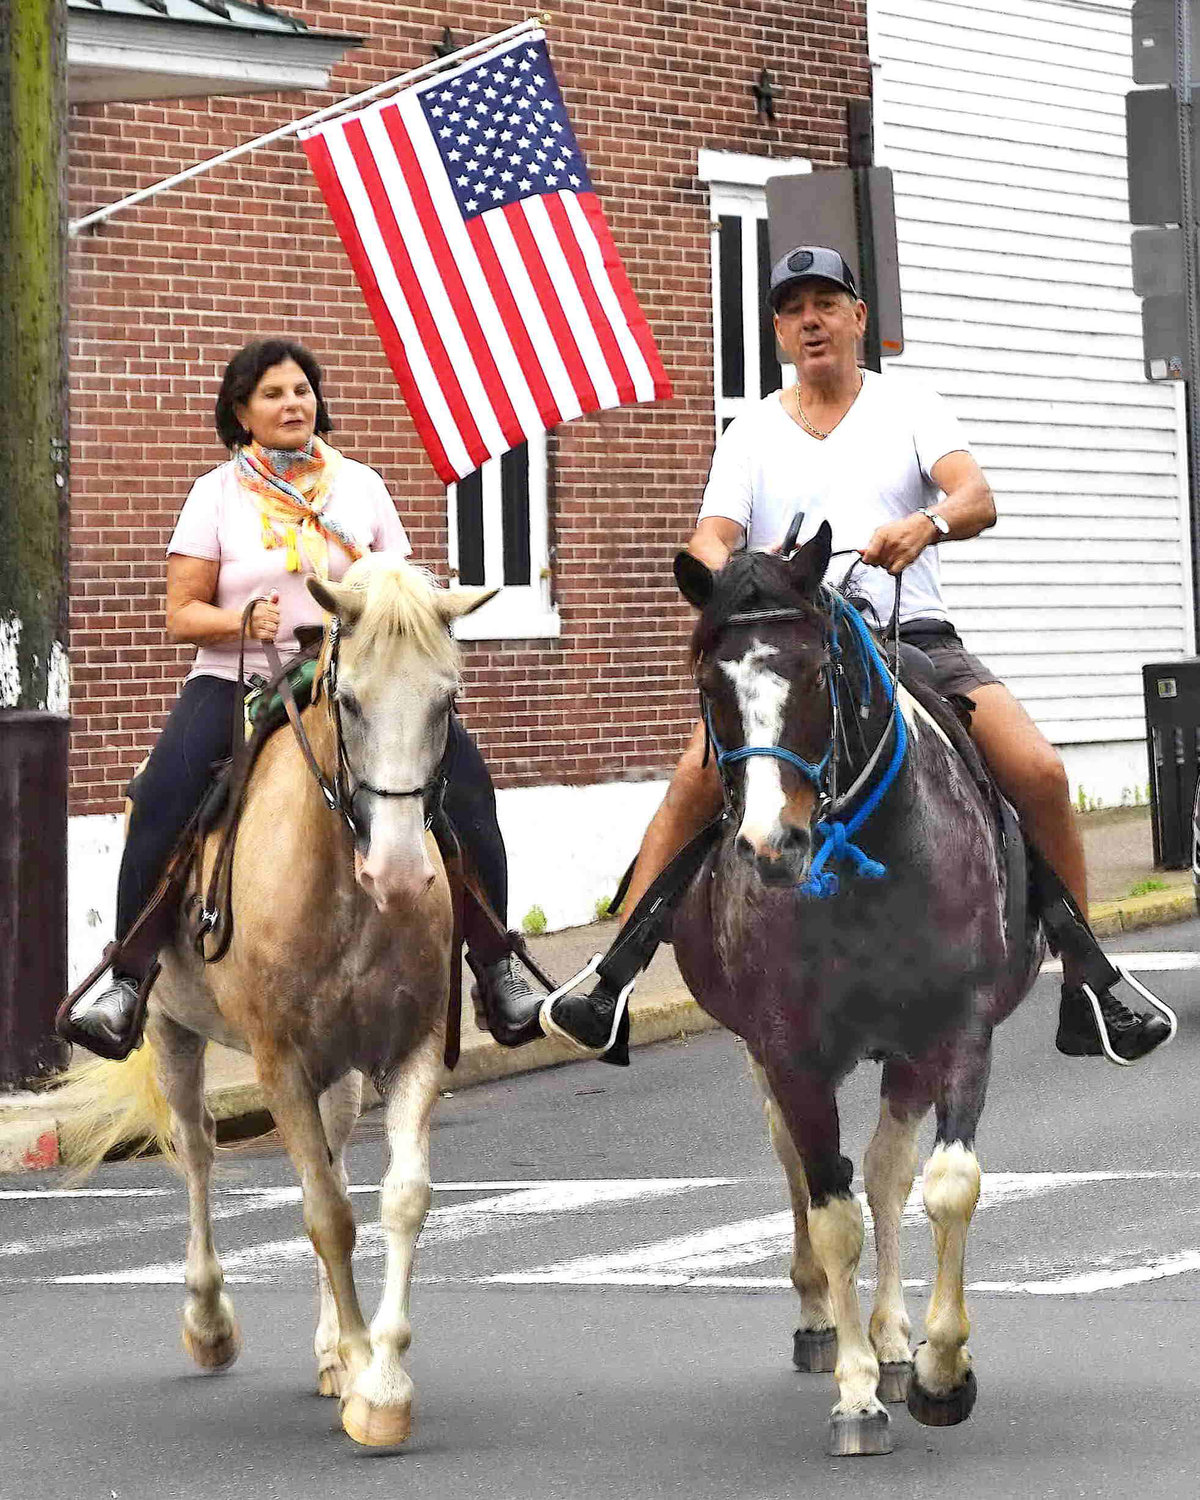 Some folks came to New Hope on their horses to see the parade.